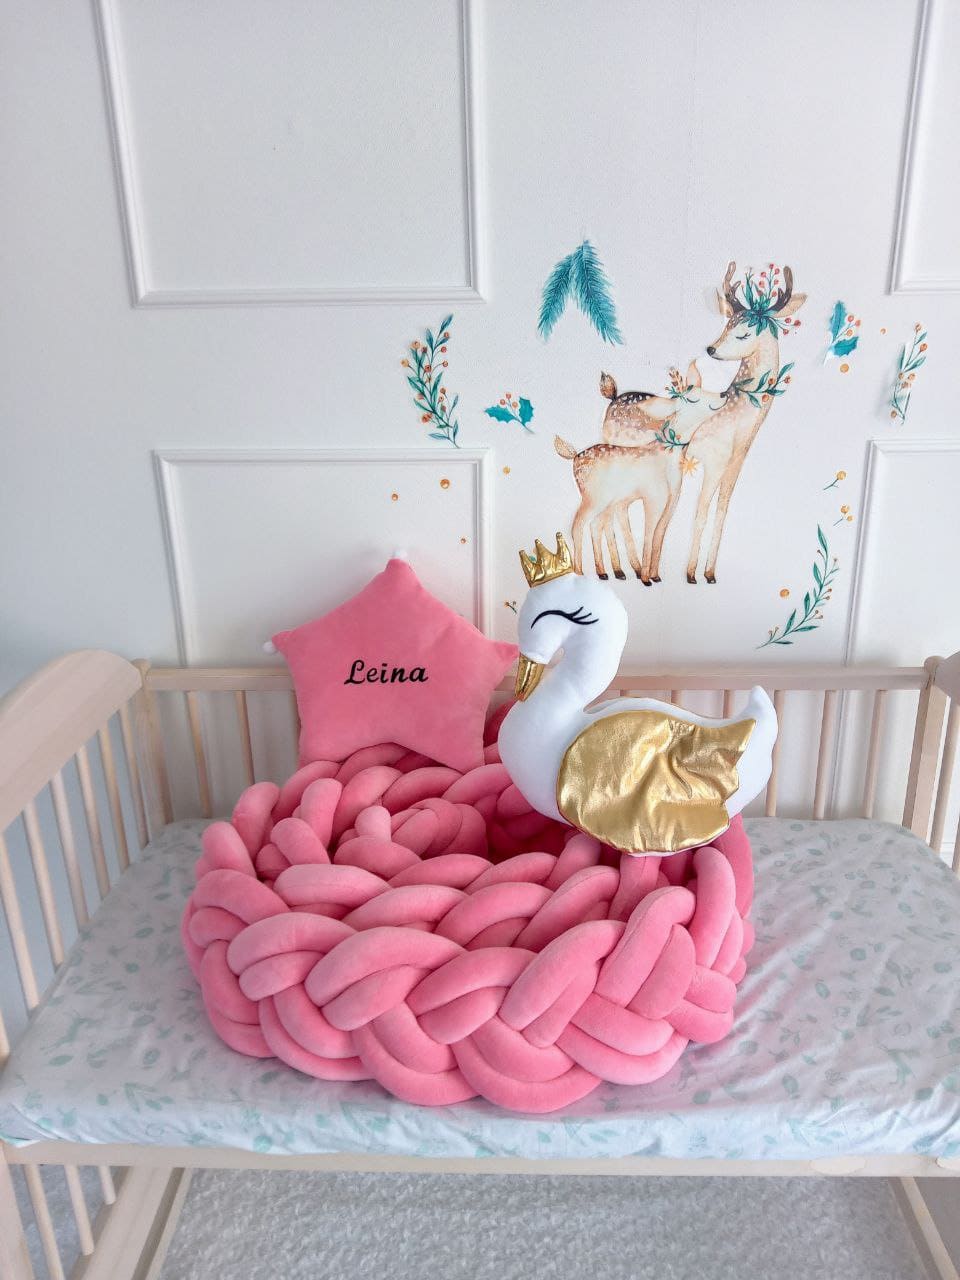 Barbie braided cot bumper, barbie star pillow and white swan pillow on the crib. Allbright Kids best nursery products